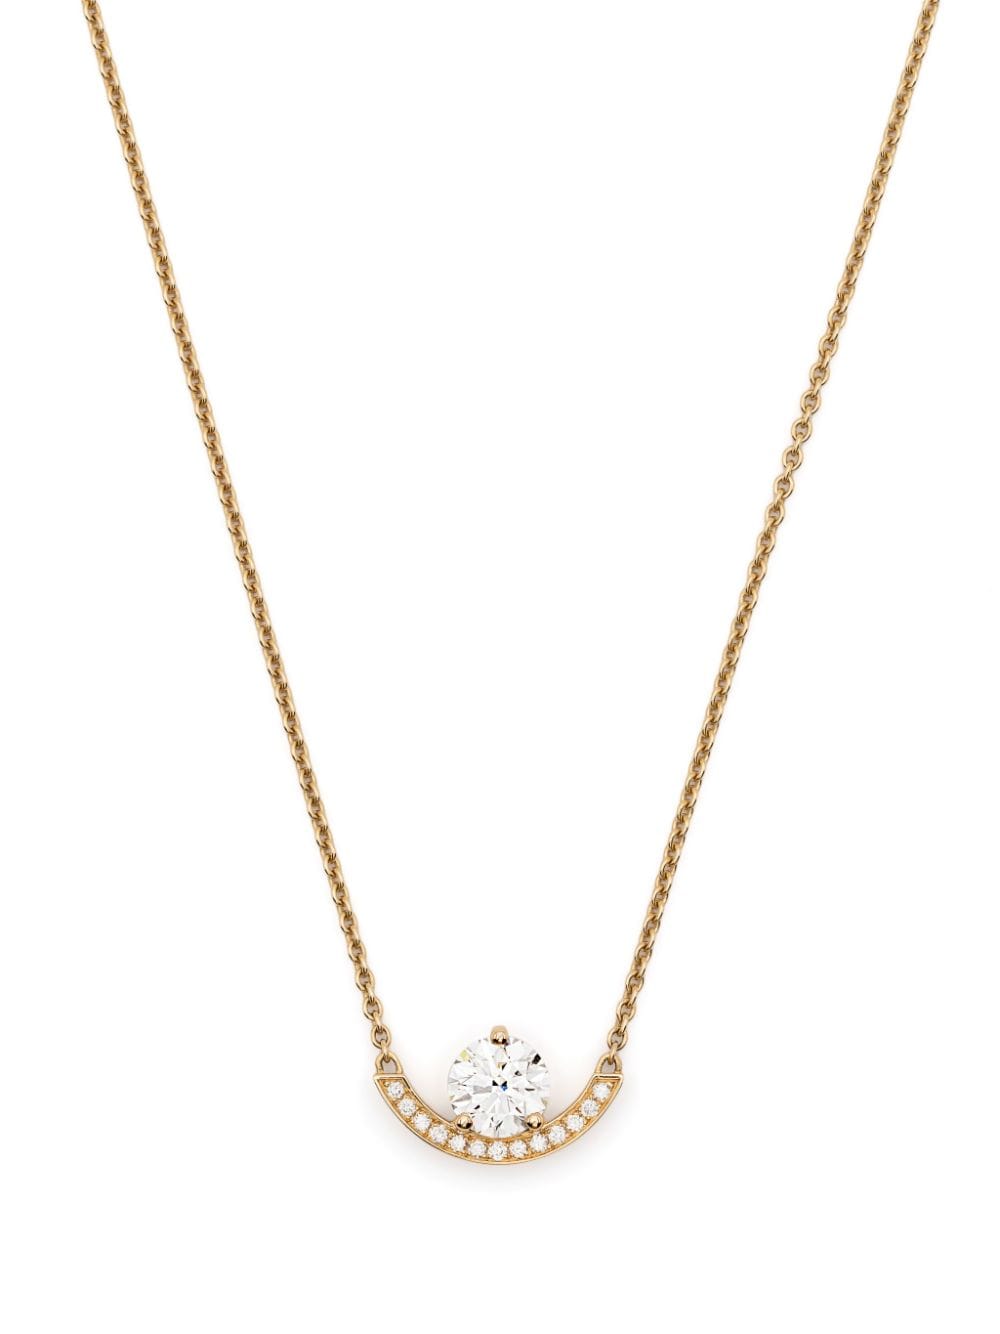 18kt recycled yellow gold Intrépide Grand Arc diamond necklace